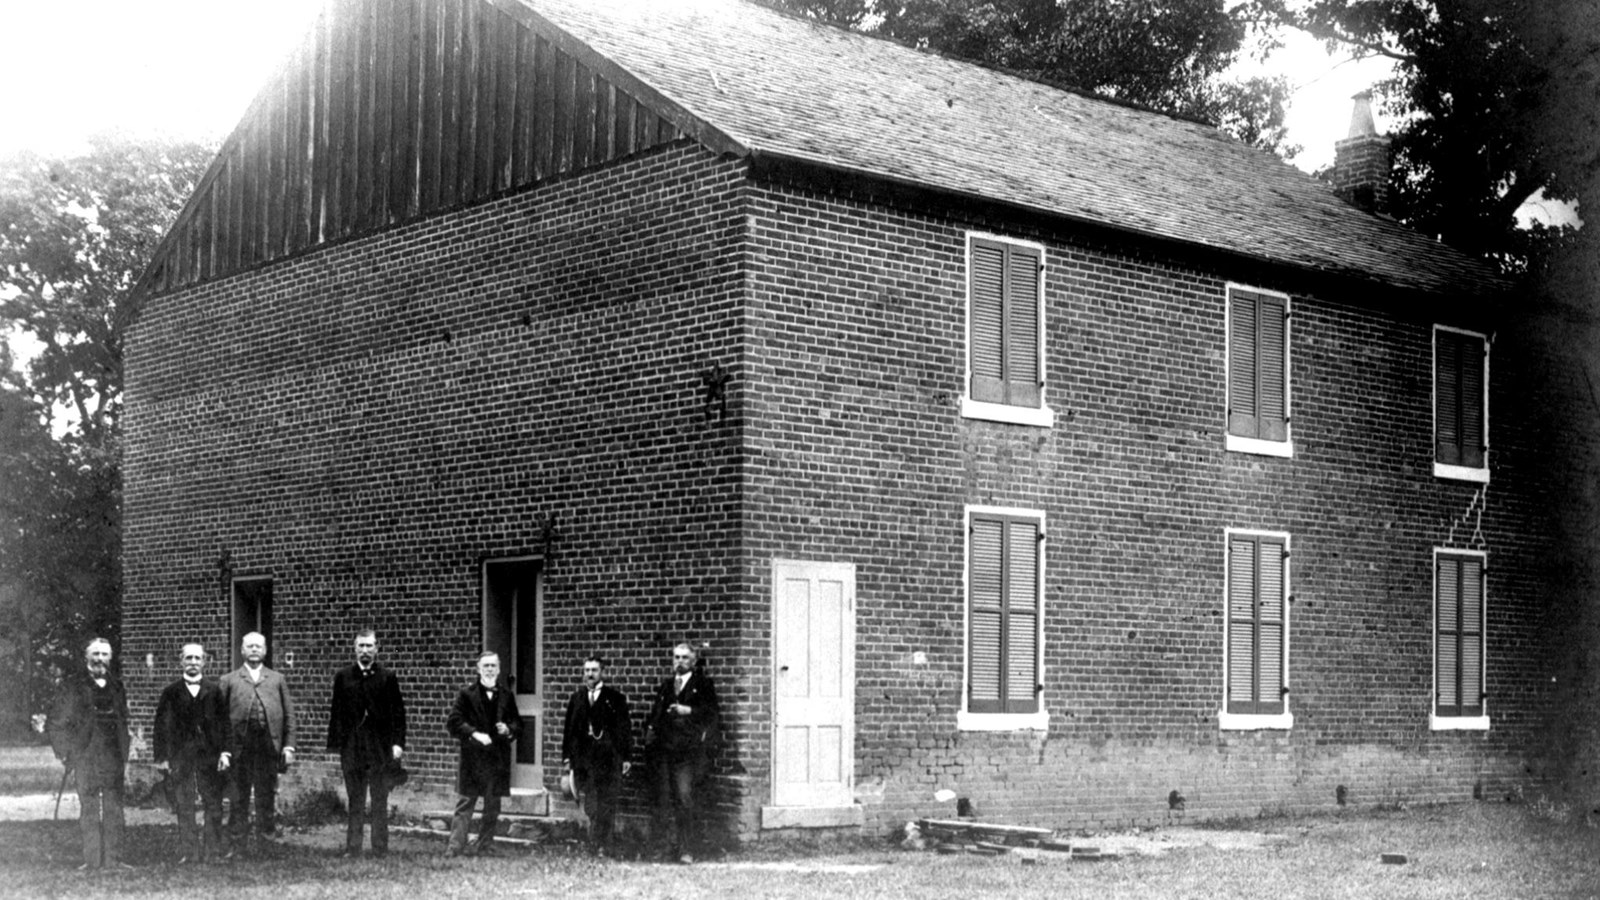 Six men in suits stand in front of a two story brick church, historical photo.